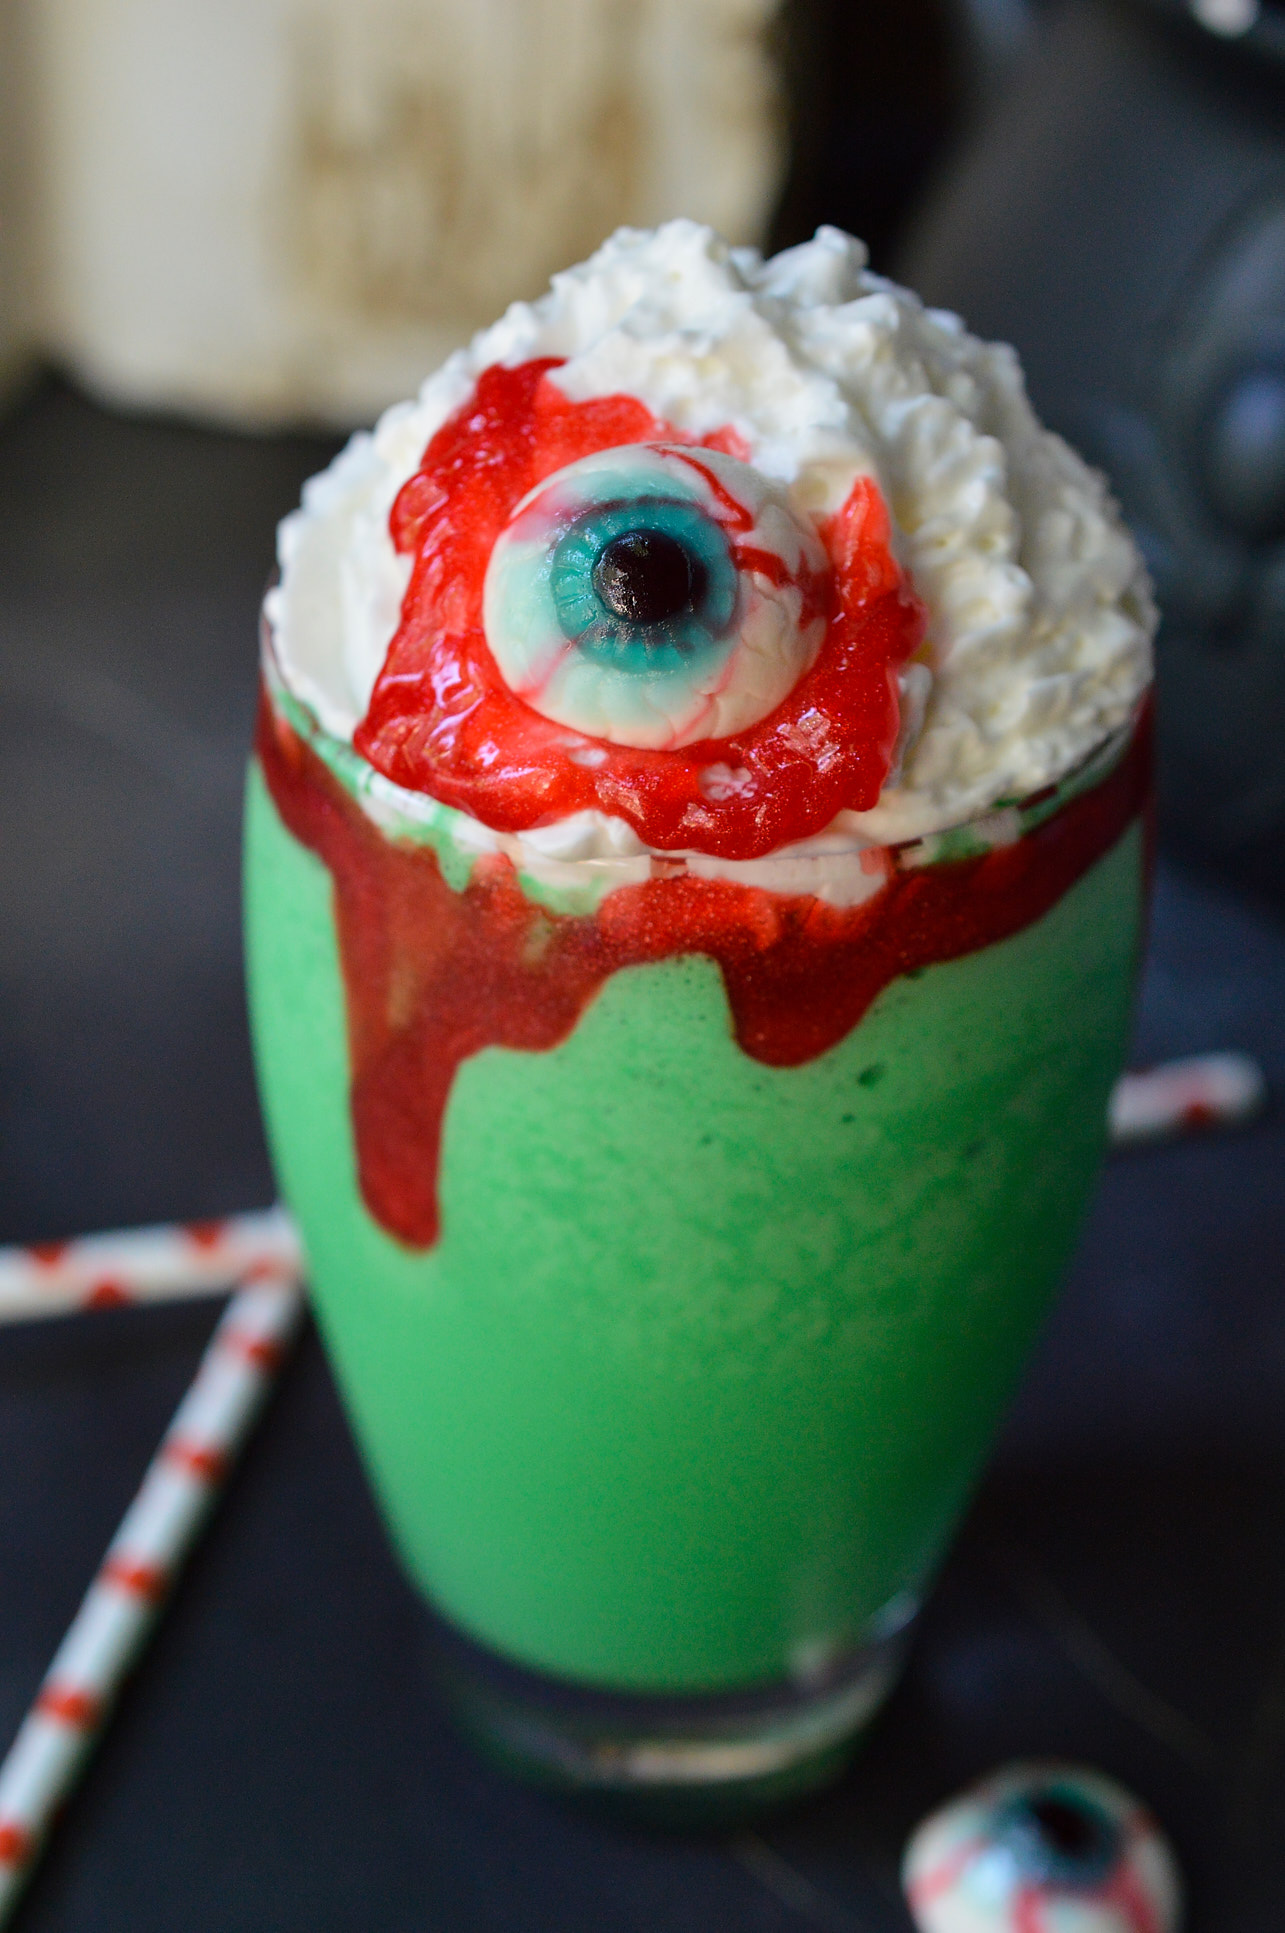 Make this Eye of Toad Halloween Milkshake Recipe for all of your creepy little monsters! This Halloween dessert is made with cookies and cream ice cream, green coloring, whipped cream, red blood gel and topped with a gummy eyeball. This fun recipe is kid approved!